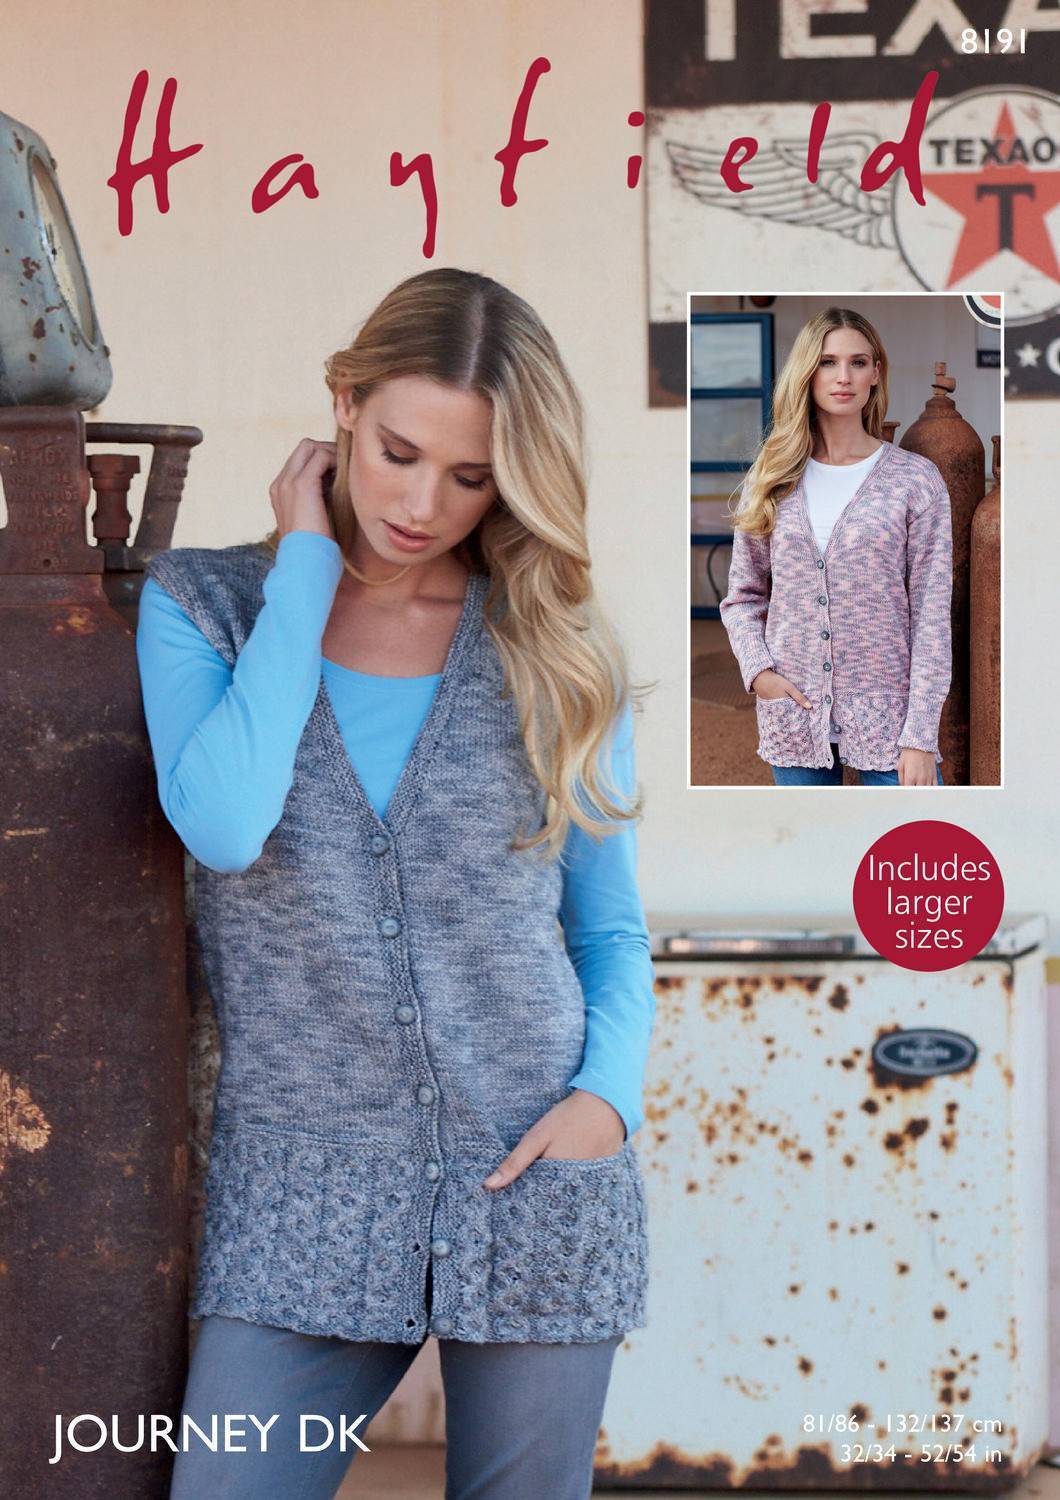 Cardigan and Waistcoat in Hayfield Journey DK (8191) | The Knitting Network